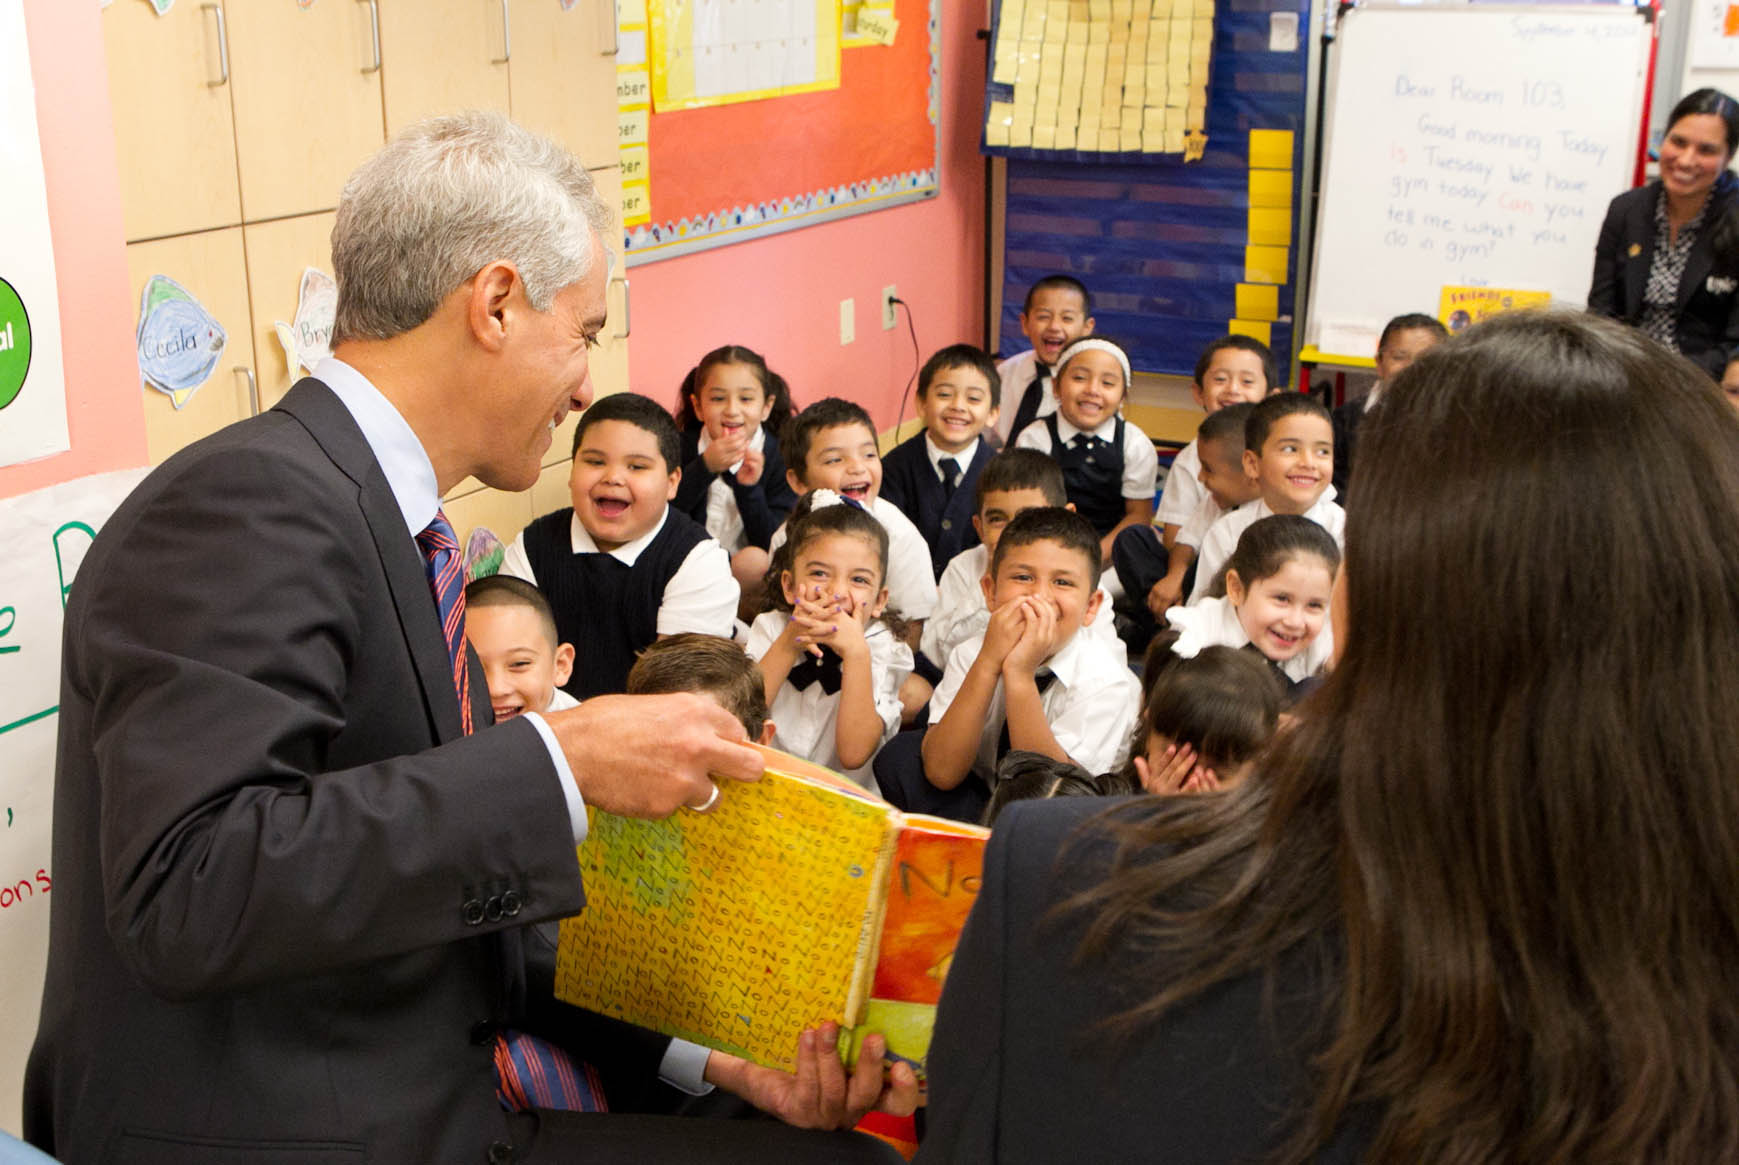 Mayor Emanuel Reads to Children in an Early Learning Class Last Fall